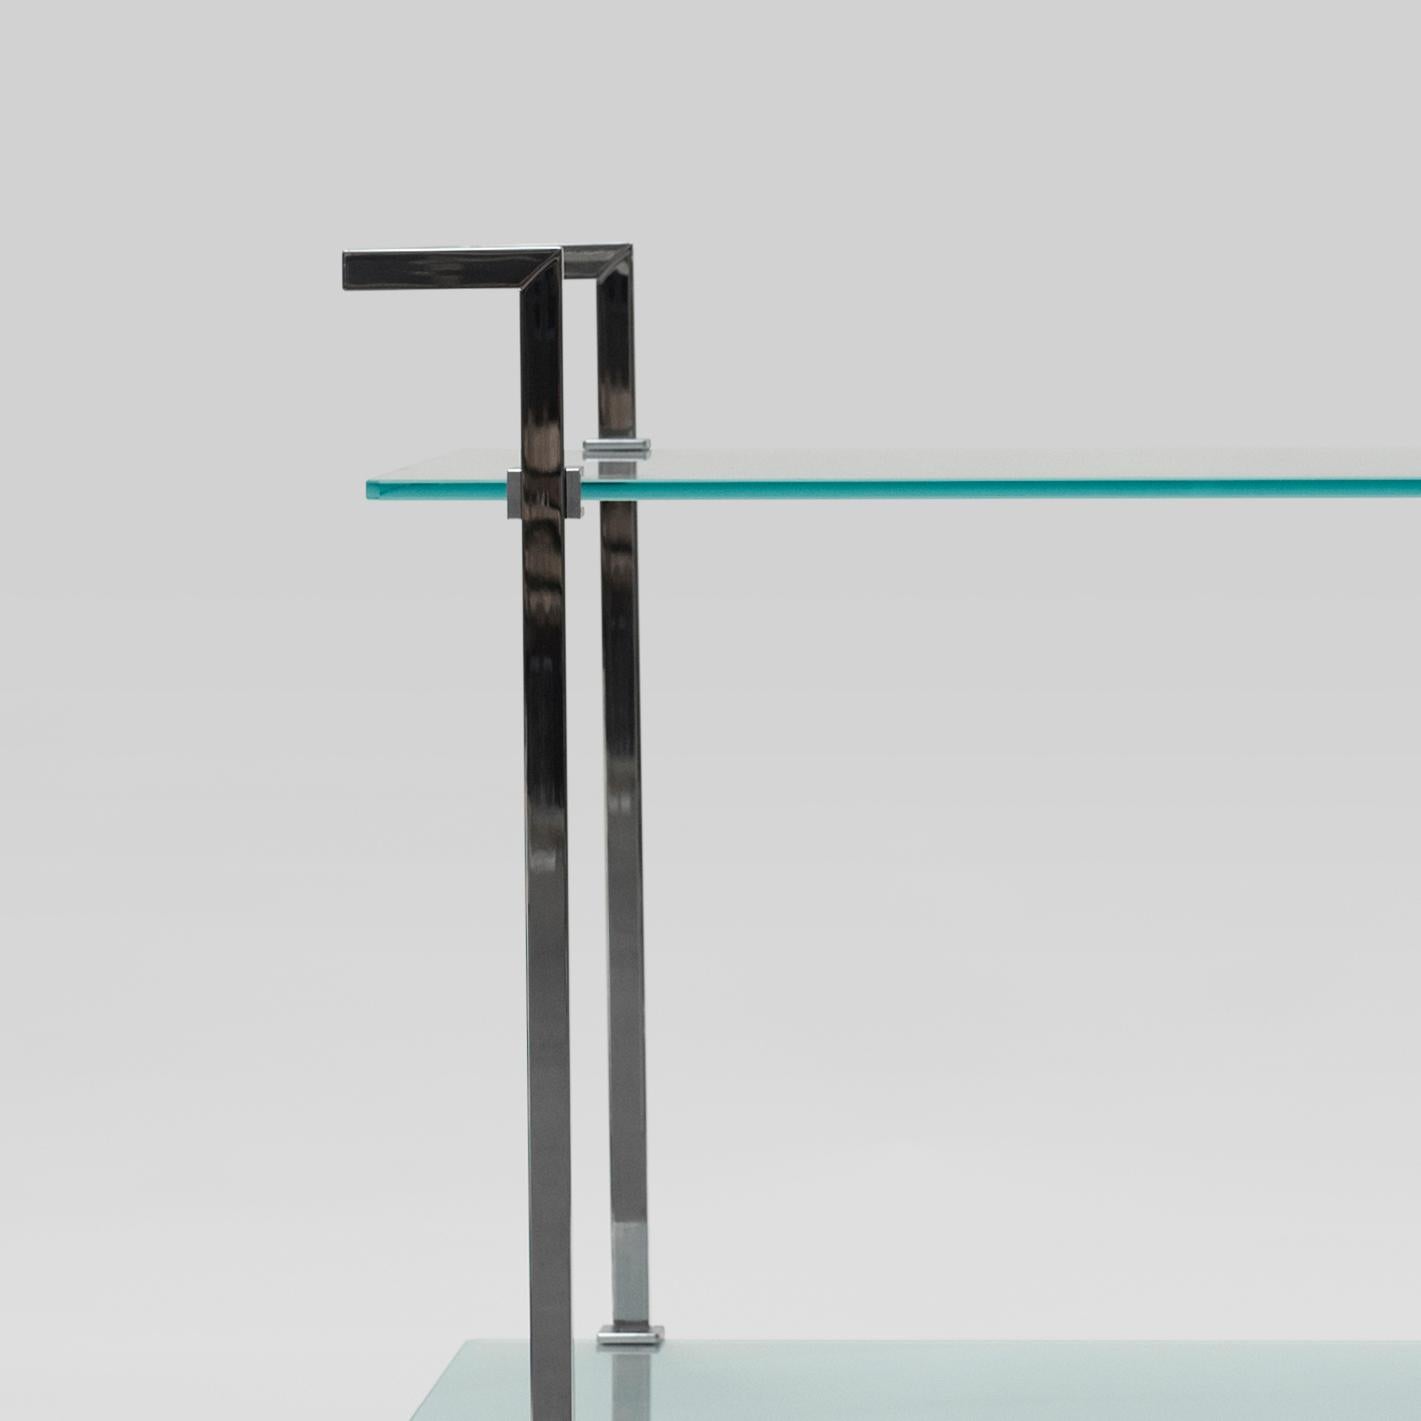 Tea trolley designed by Peter Ghyczy in 2004.
Manufactured by Ghyczy, (Netherlands)

This slender tea trolley is a piece of art on its own. Two tempered glass plates connect the metal frames. Small cast metal details secure the transparent